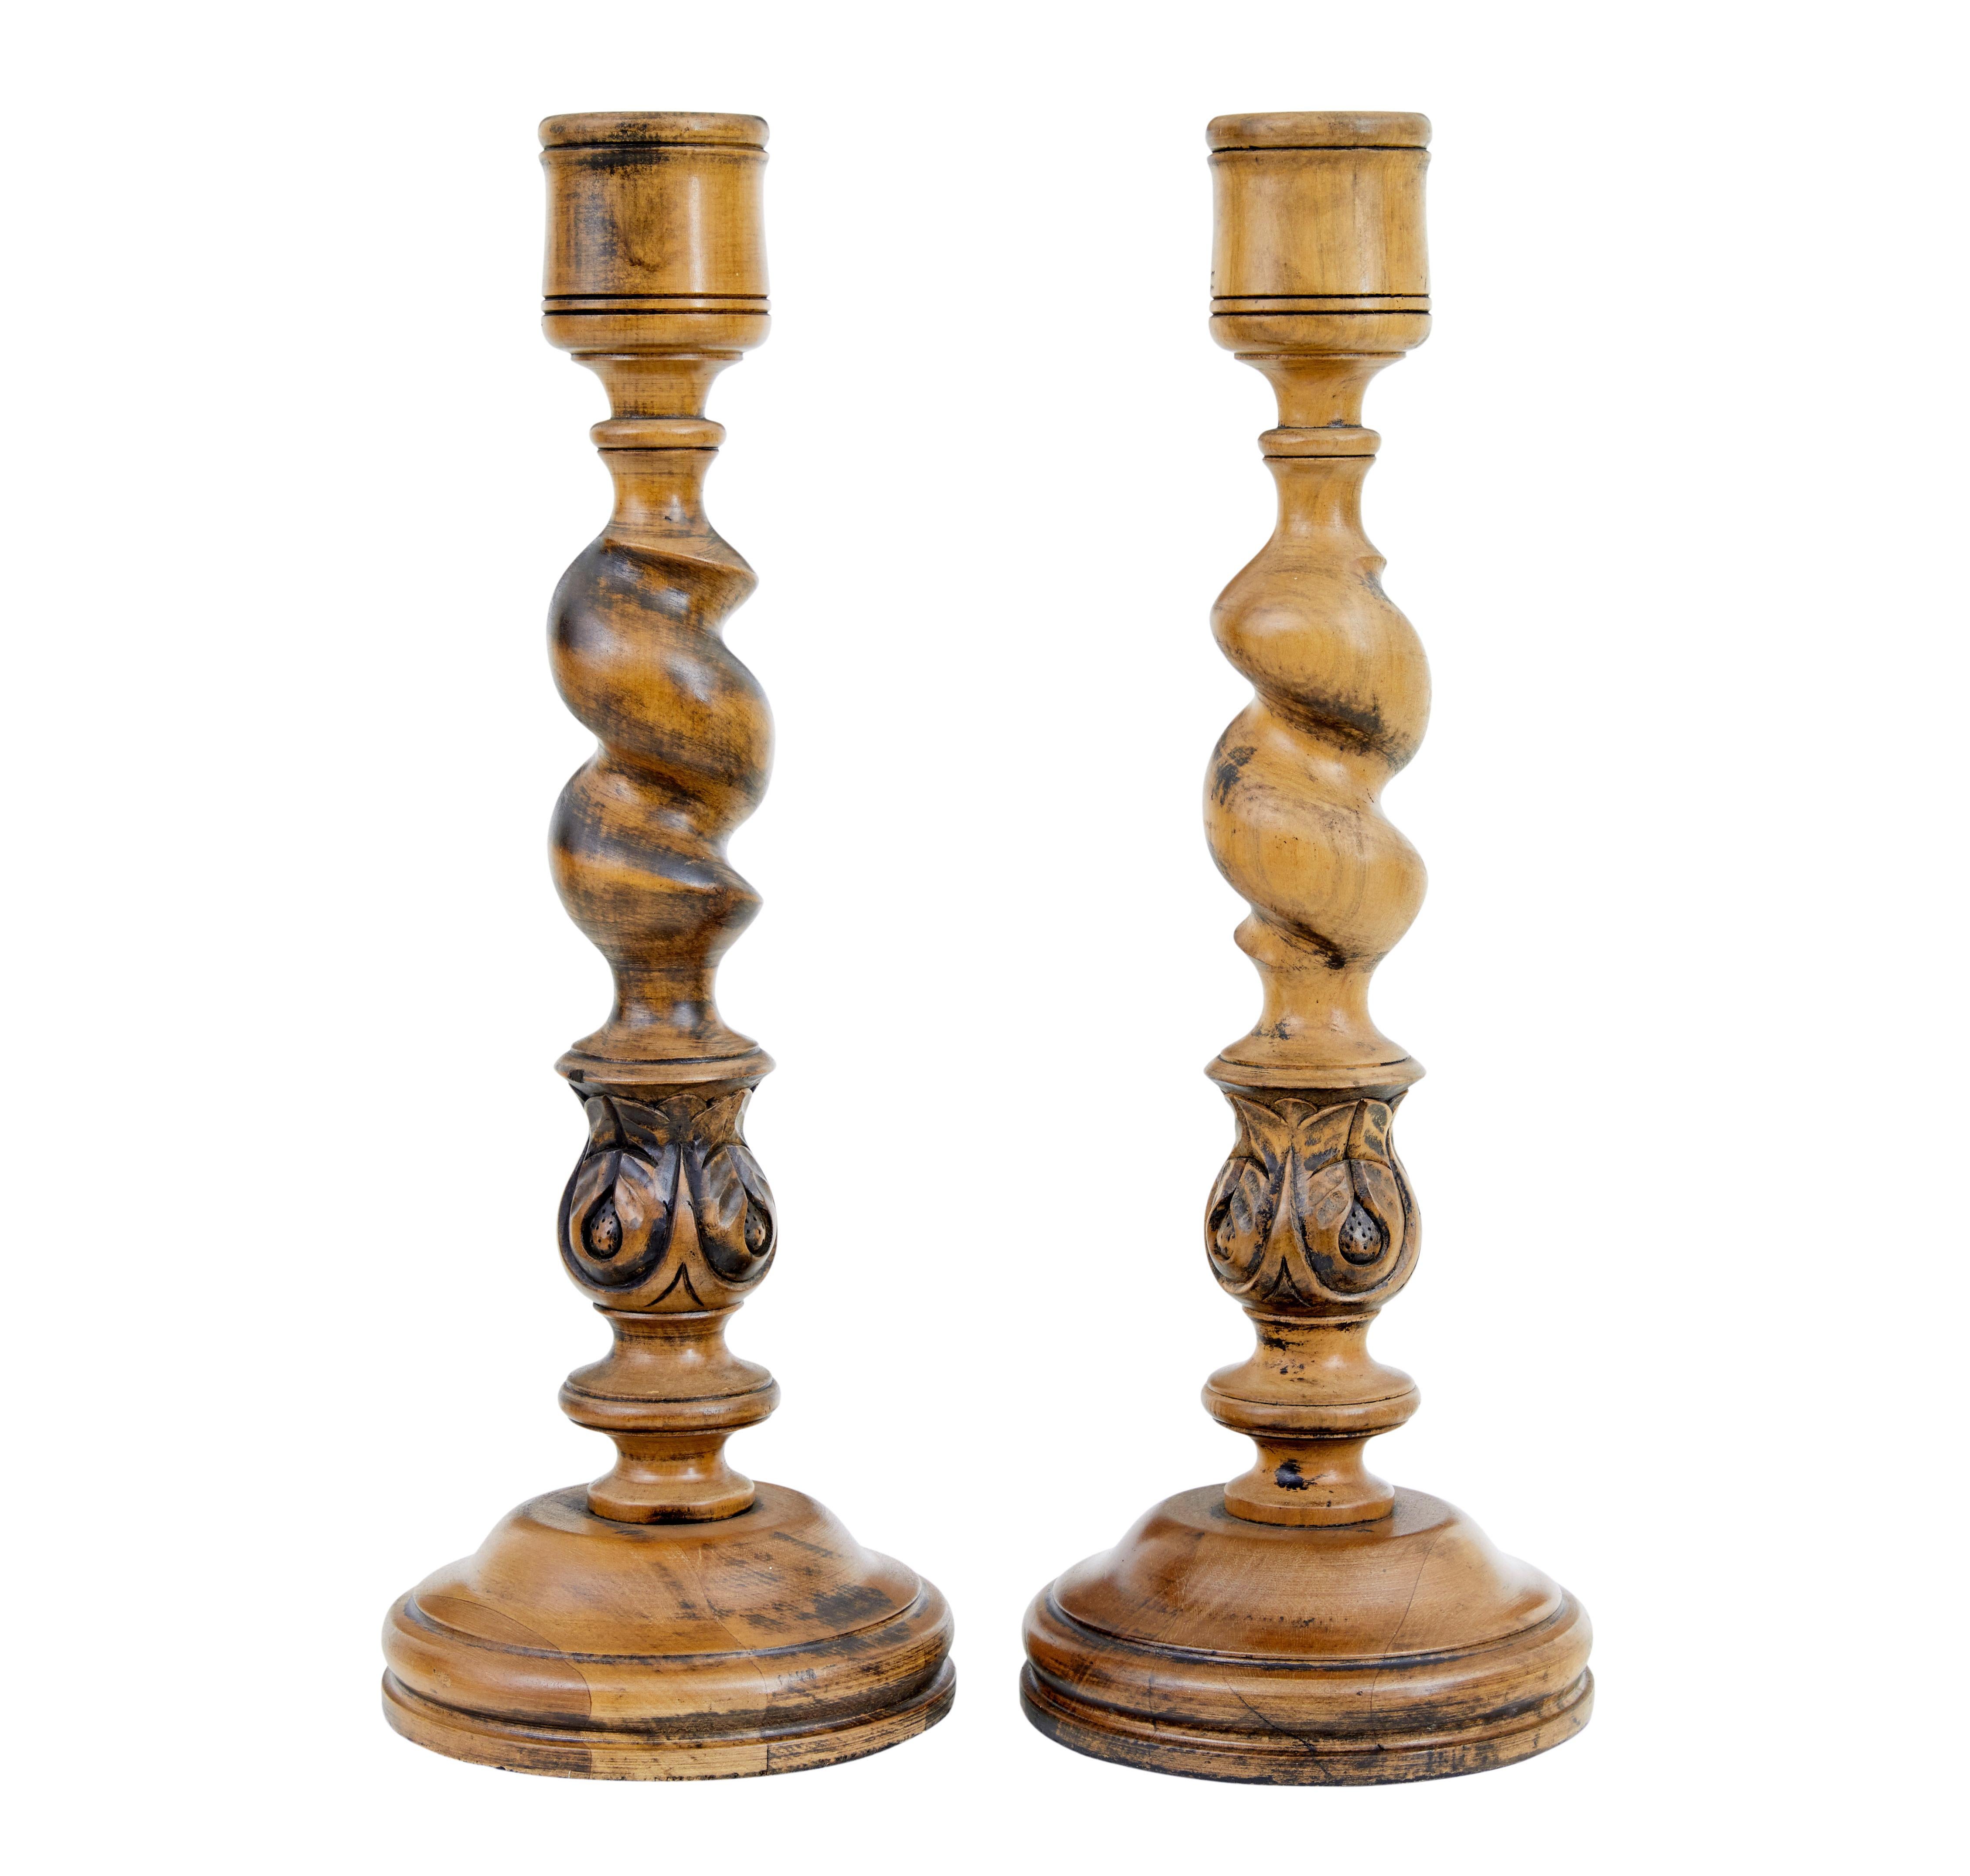 Pair of large early 20th century candlesticks circa 1920.

Good quality pair of hand carved candlesticks made from beech, very much in the gothic taste.

2 inch wide cup, twisted stem with bulbous acanthus leaf detail, standing on a round plinth